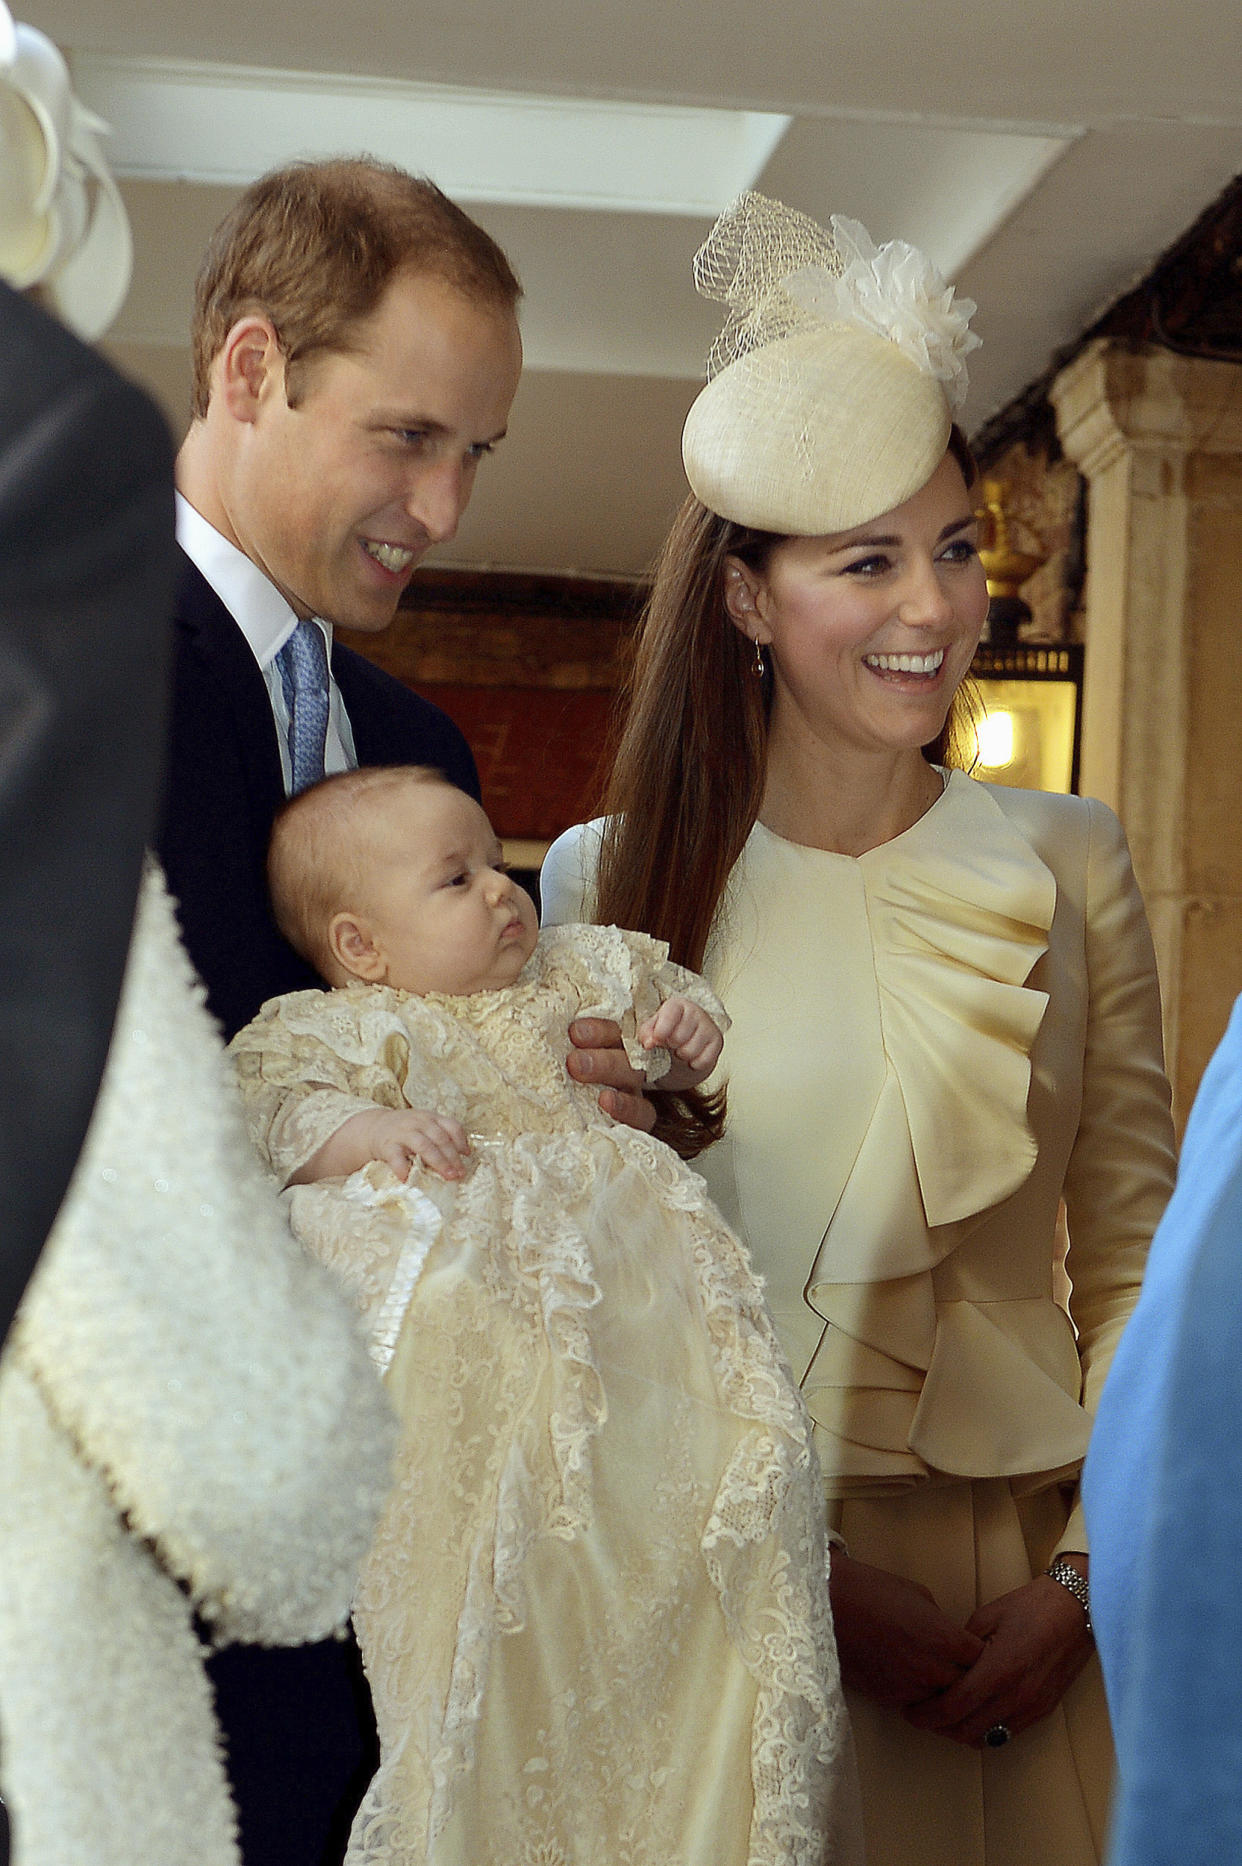 Britain's Prince William carries his son Prince George, as he arrives with his wife Catherine, Duchess of Cambridge for their son's christening at St James's Palace in London October 23, 2013. REUTERS/John Stillwell/pool  (BRITAIN - Tags: ROYALS ENTERTAINMENT SOCIETY)